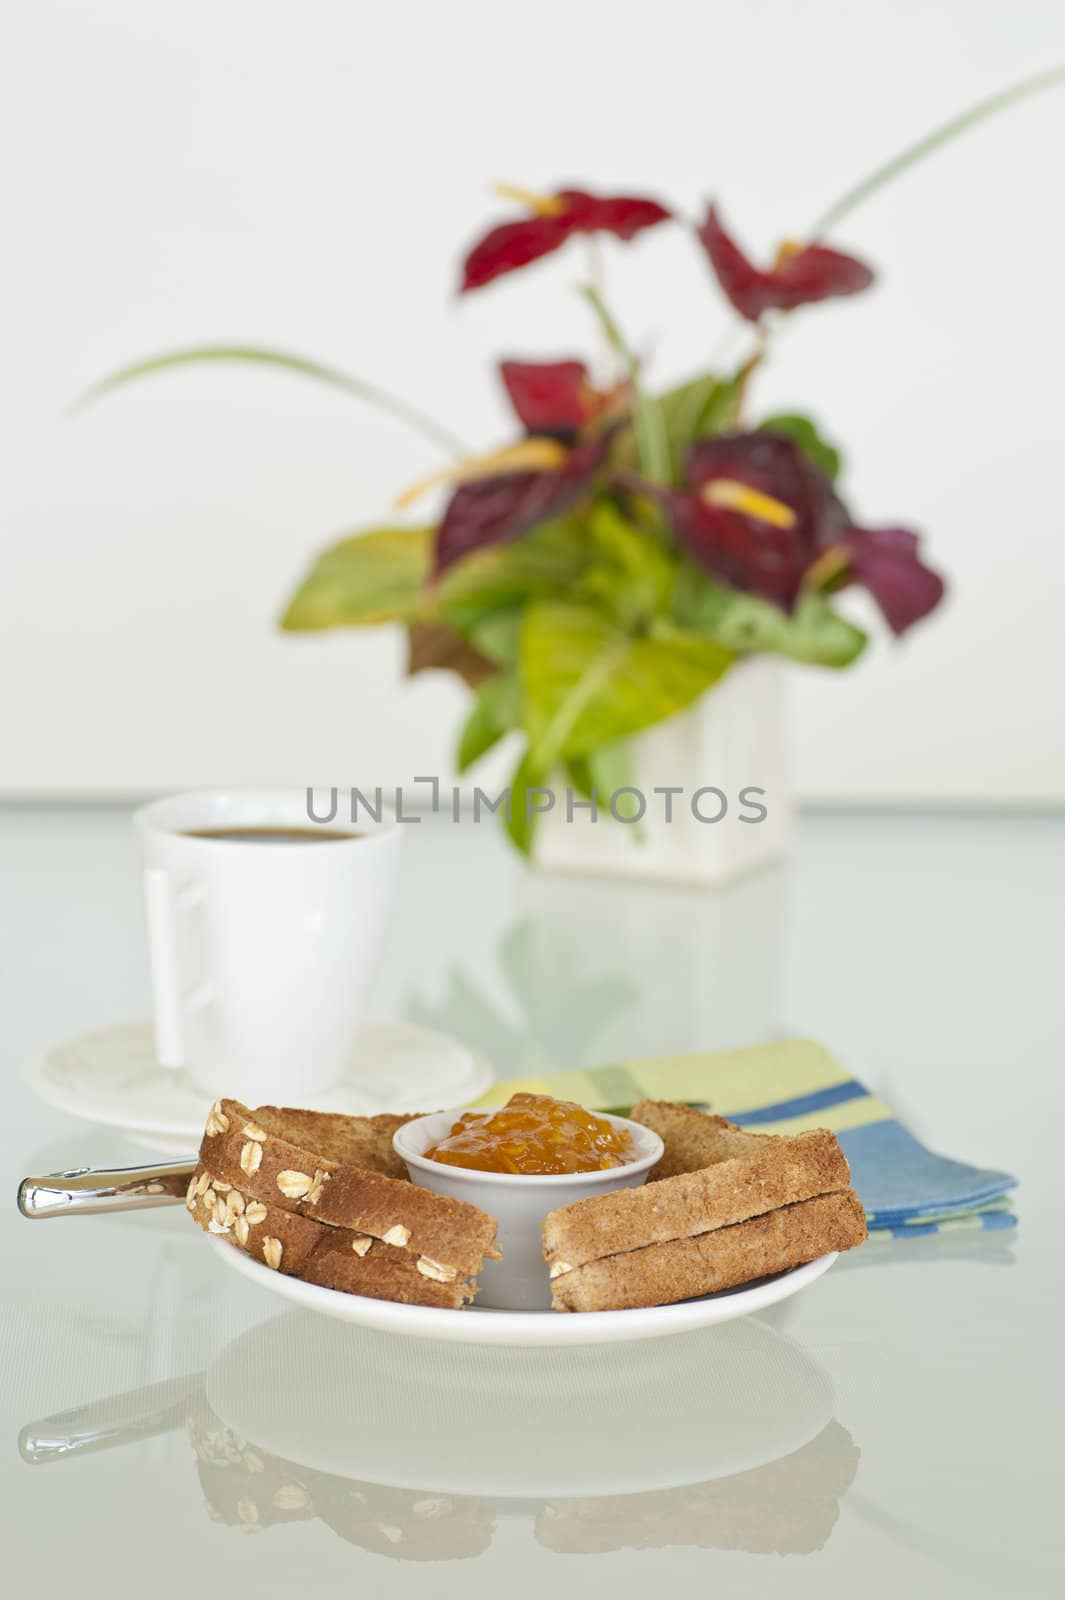 Breakfast consisting of toast with orange marmalade and coffee.